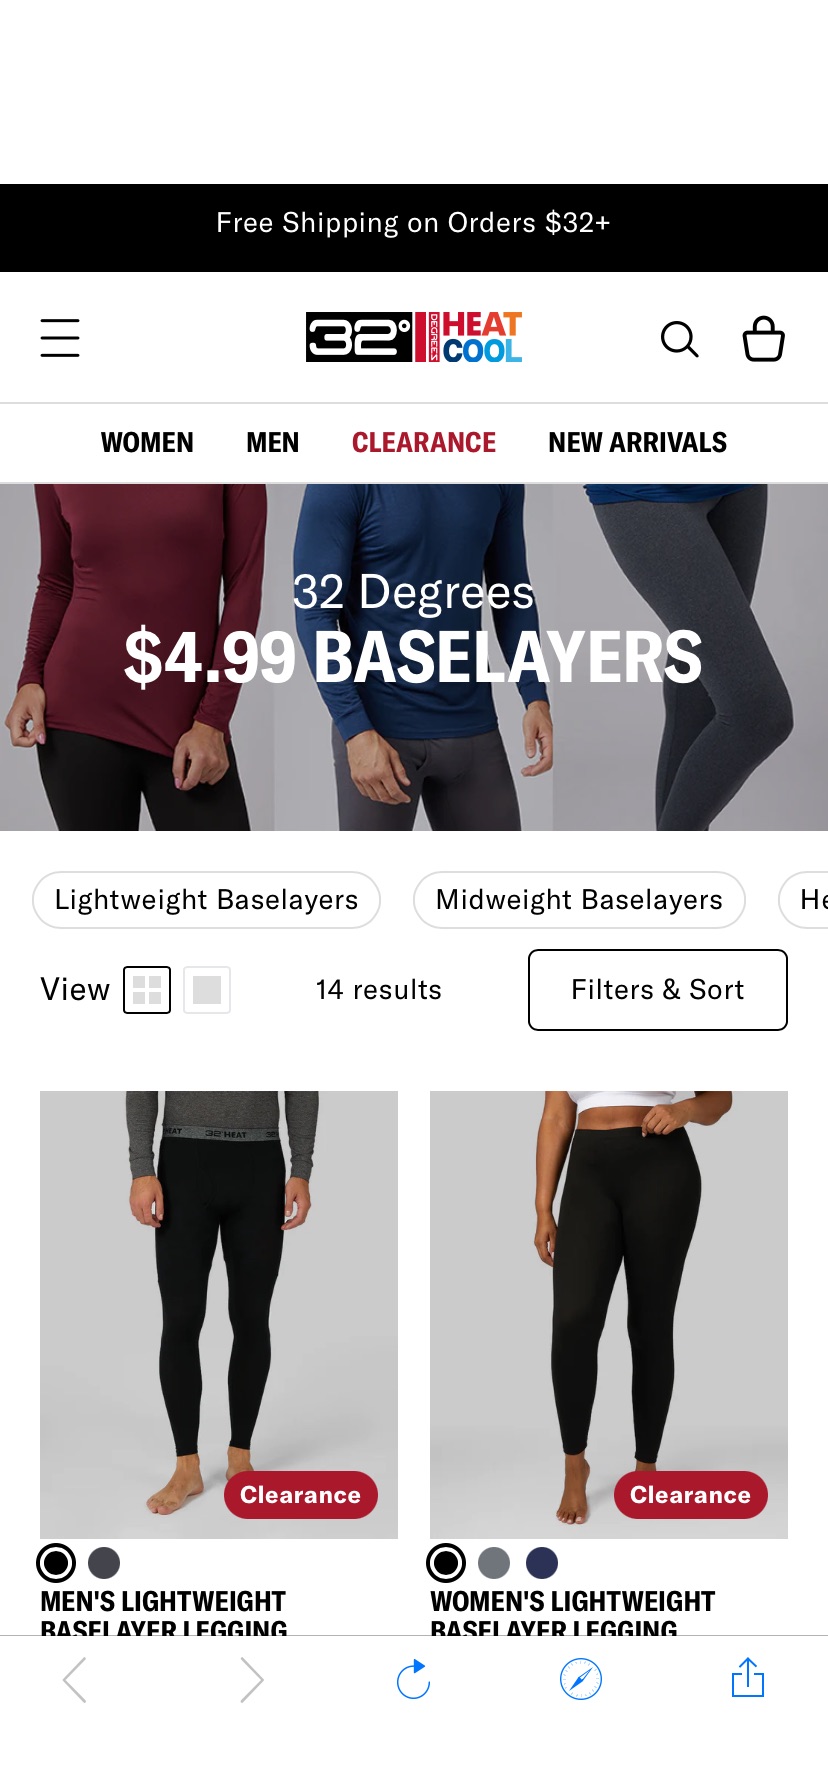 32 Degrees has their Men's and Women's Baselayers (tops and bottoms) on sale for $4.99 with free shipping with coupon code NEWS30SHIP in cart.